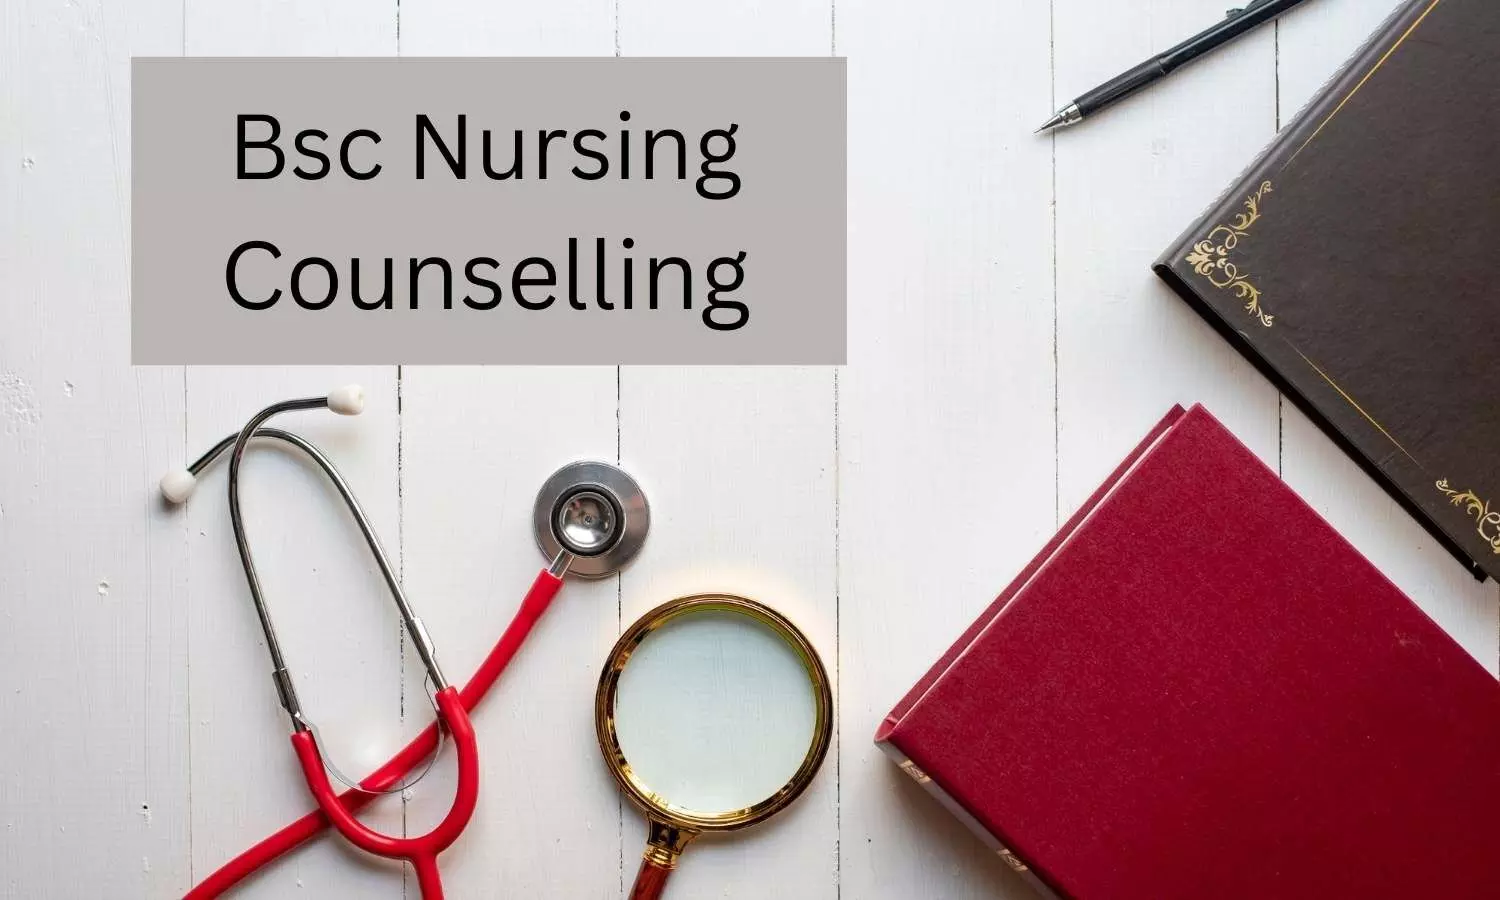 DME Assam issues notice on Round 2 Counselling for BSc Nursing admissions